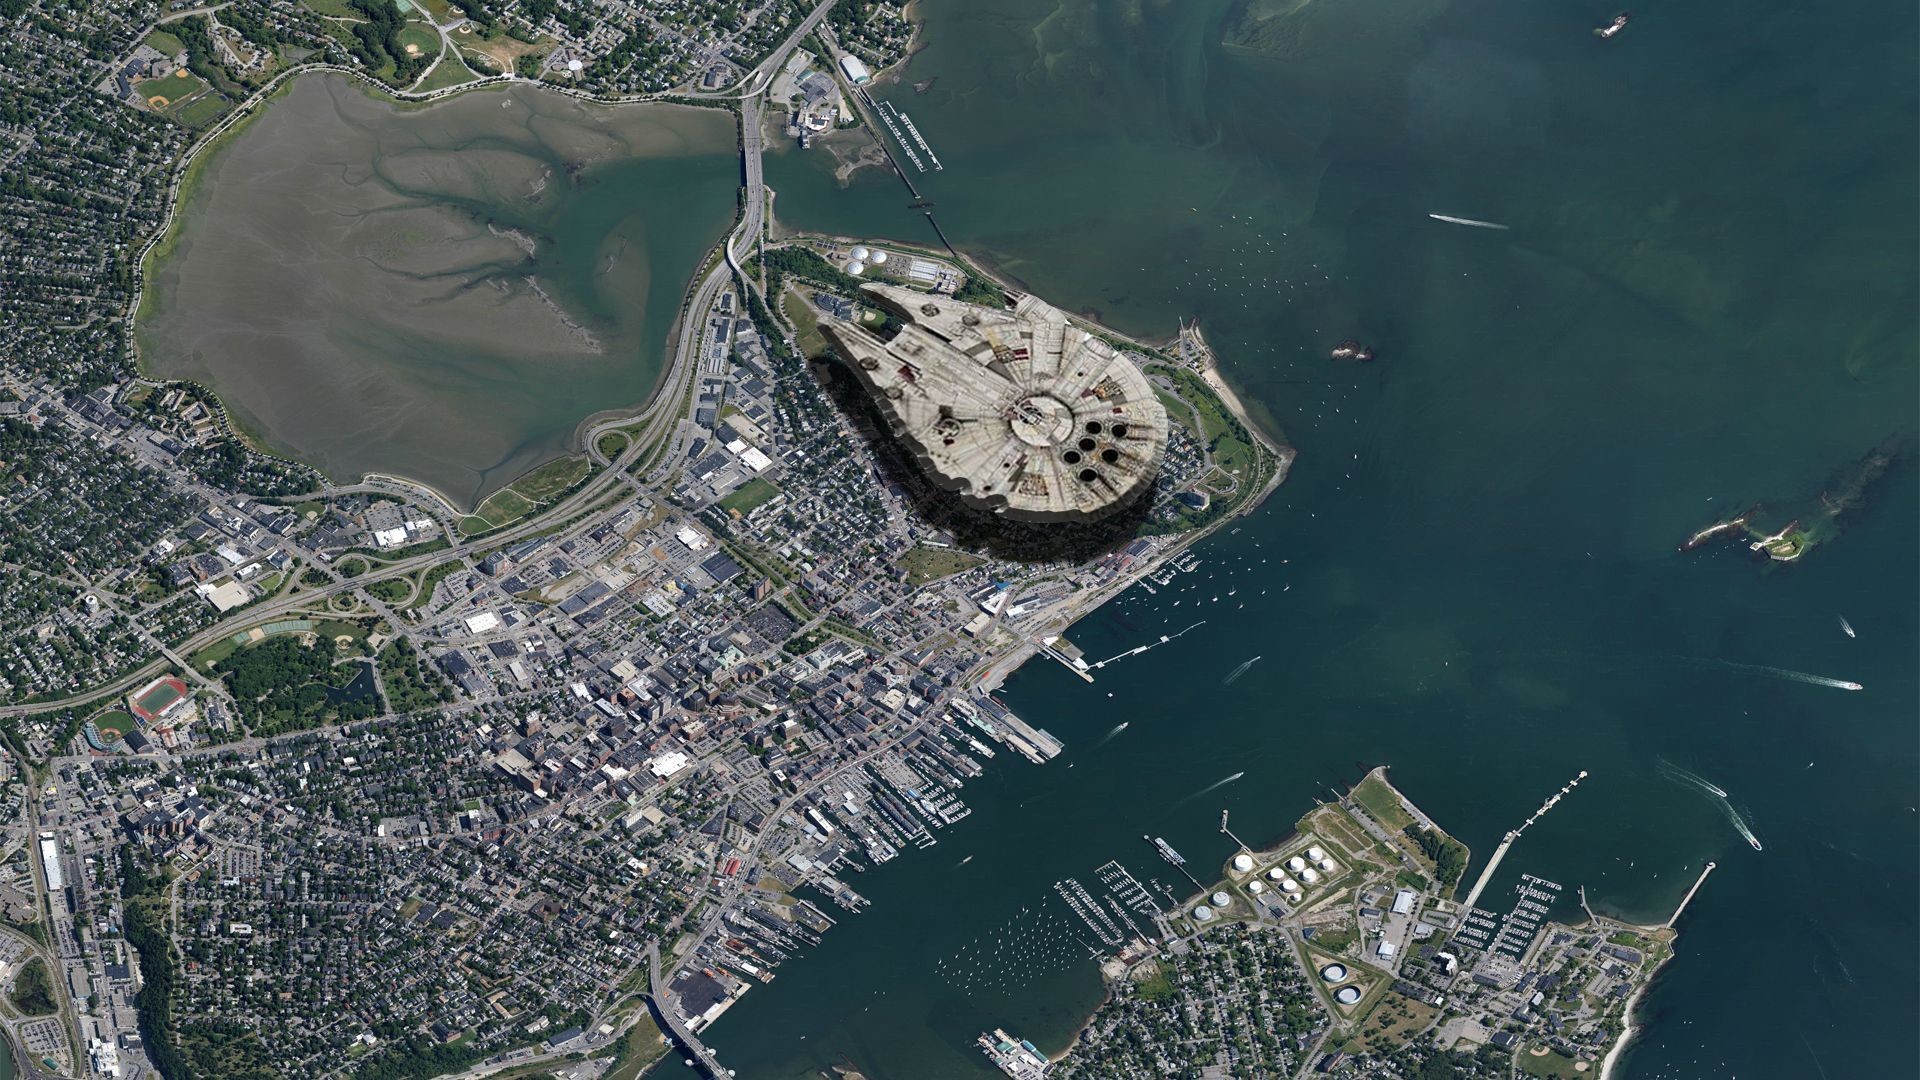 I think its time we talked about the Millenium Falcon hidden under the eastern prom in Portland